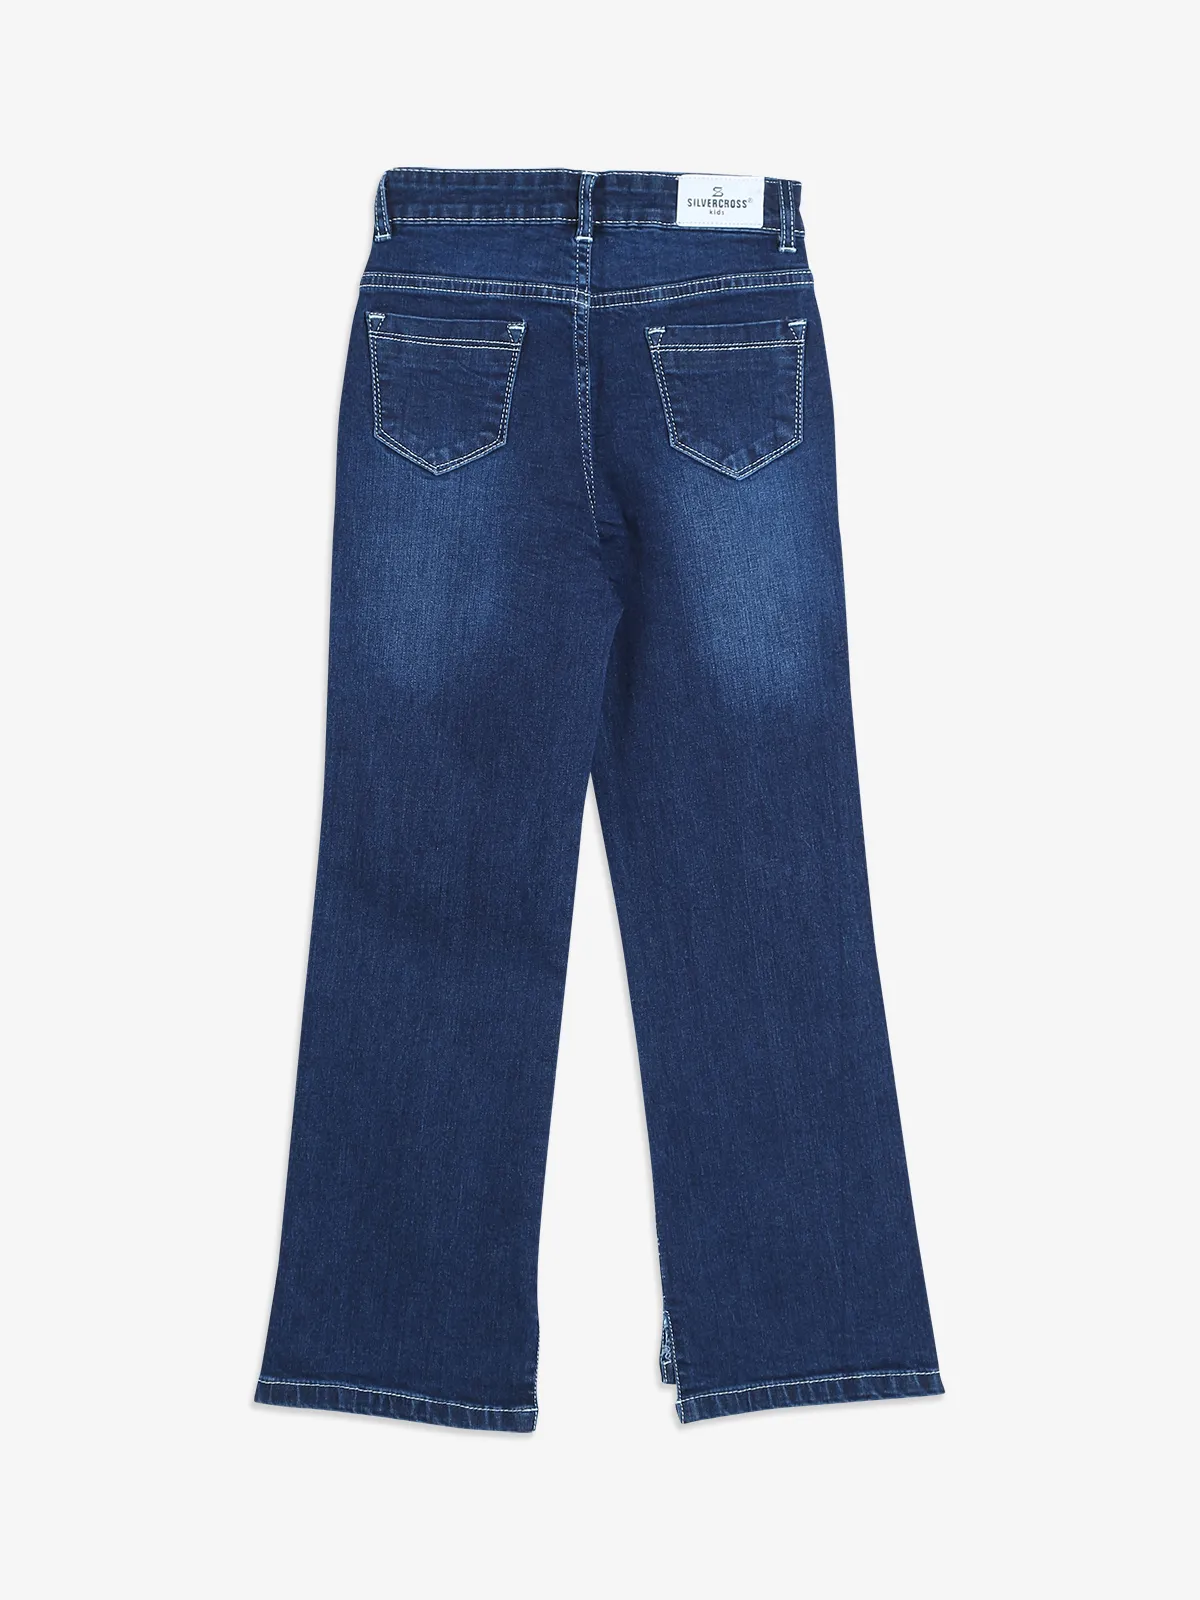 Silver Cross navy straight jeans